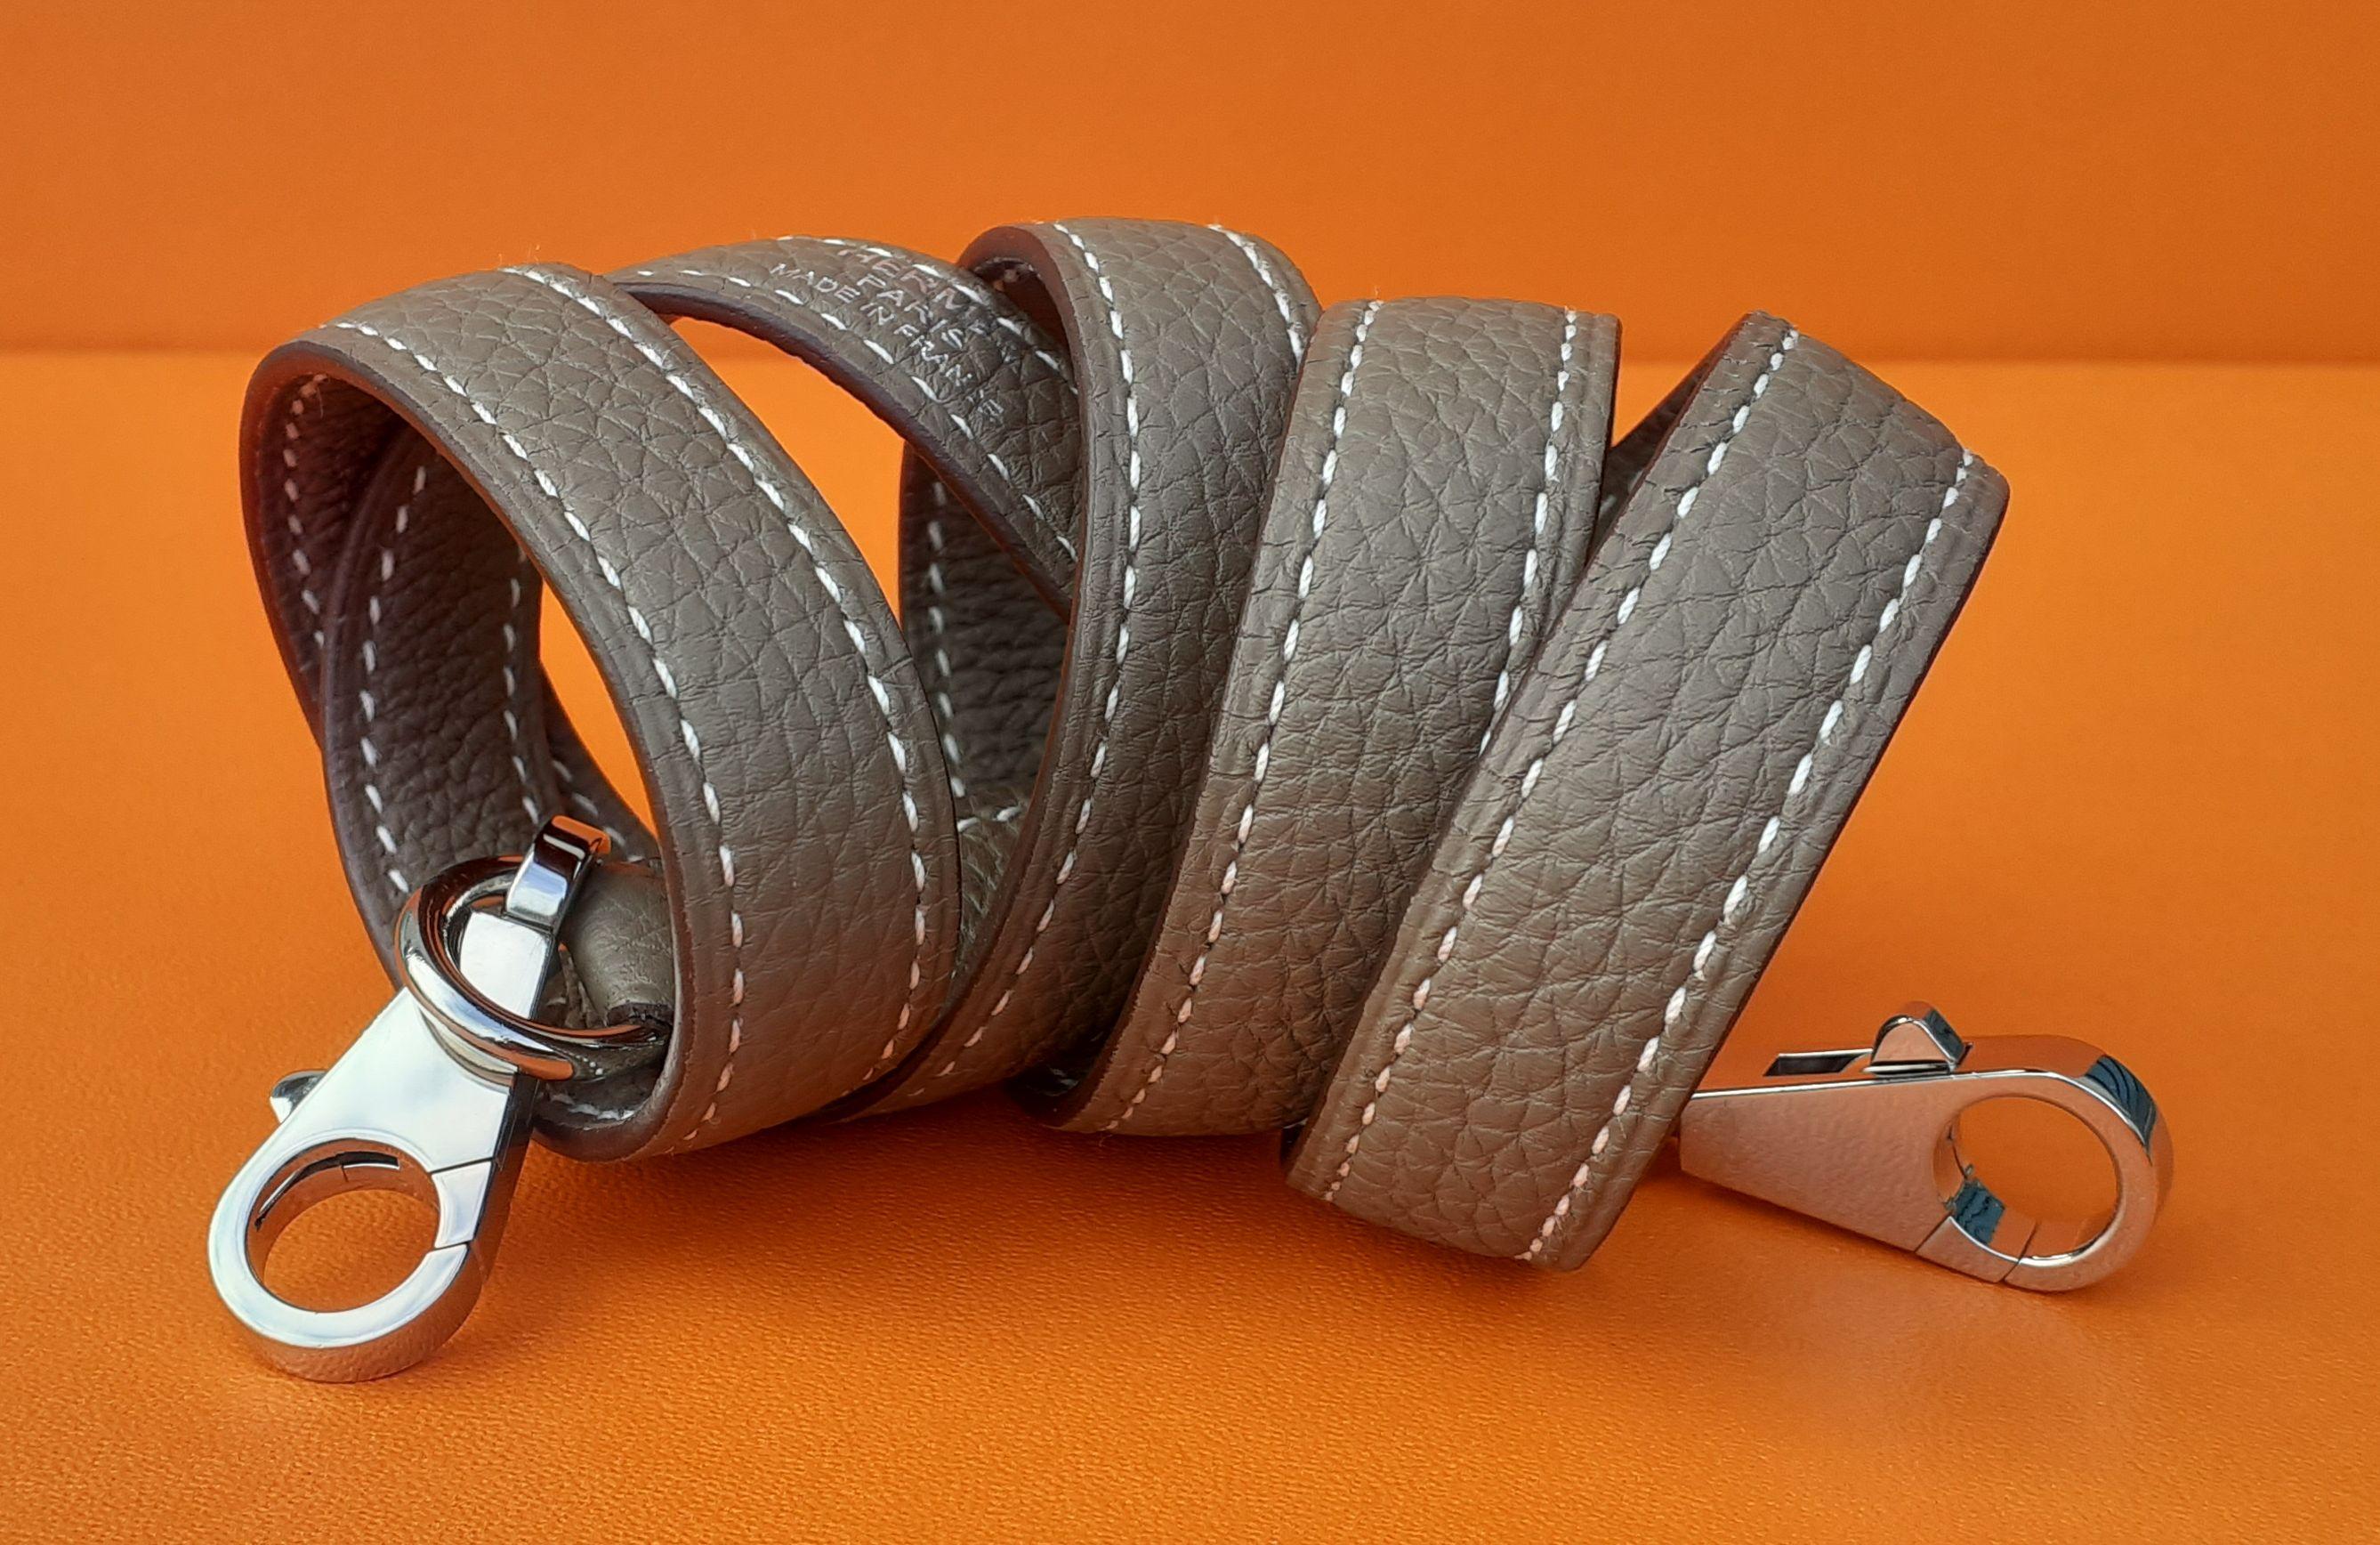 Authentic Hermès Shoulder strap

For Kelly or any other Hermès Bag

Made in France

Made of Togo Leather and Palladium Plated Hardware

Colorways: Etoupe, White Stitching, Silver-Tone Hdw

